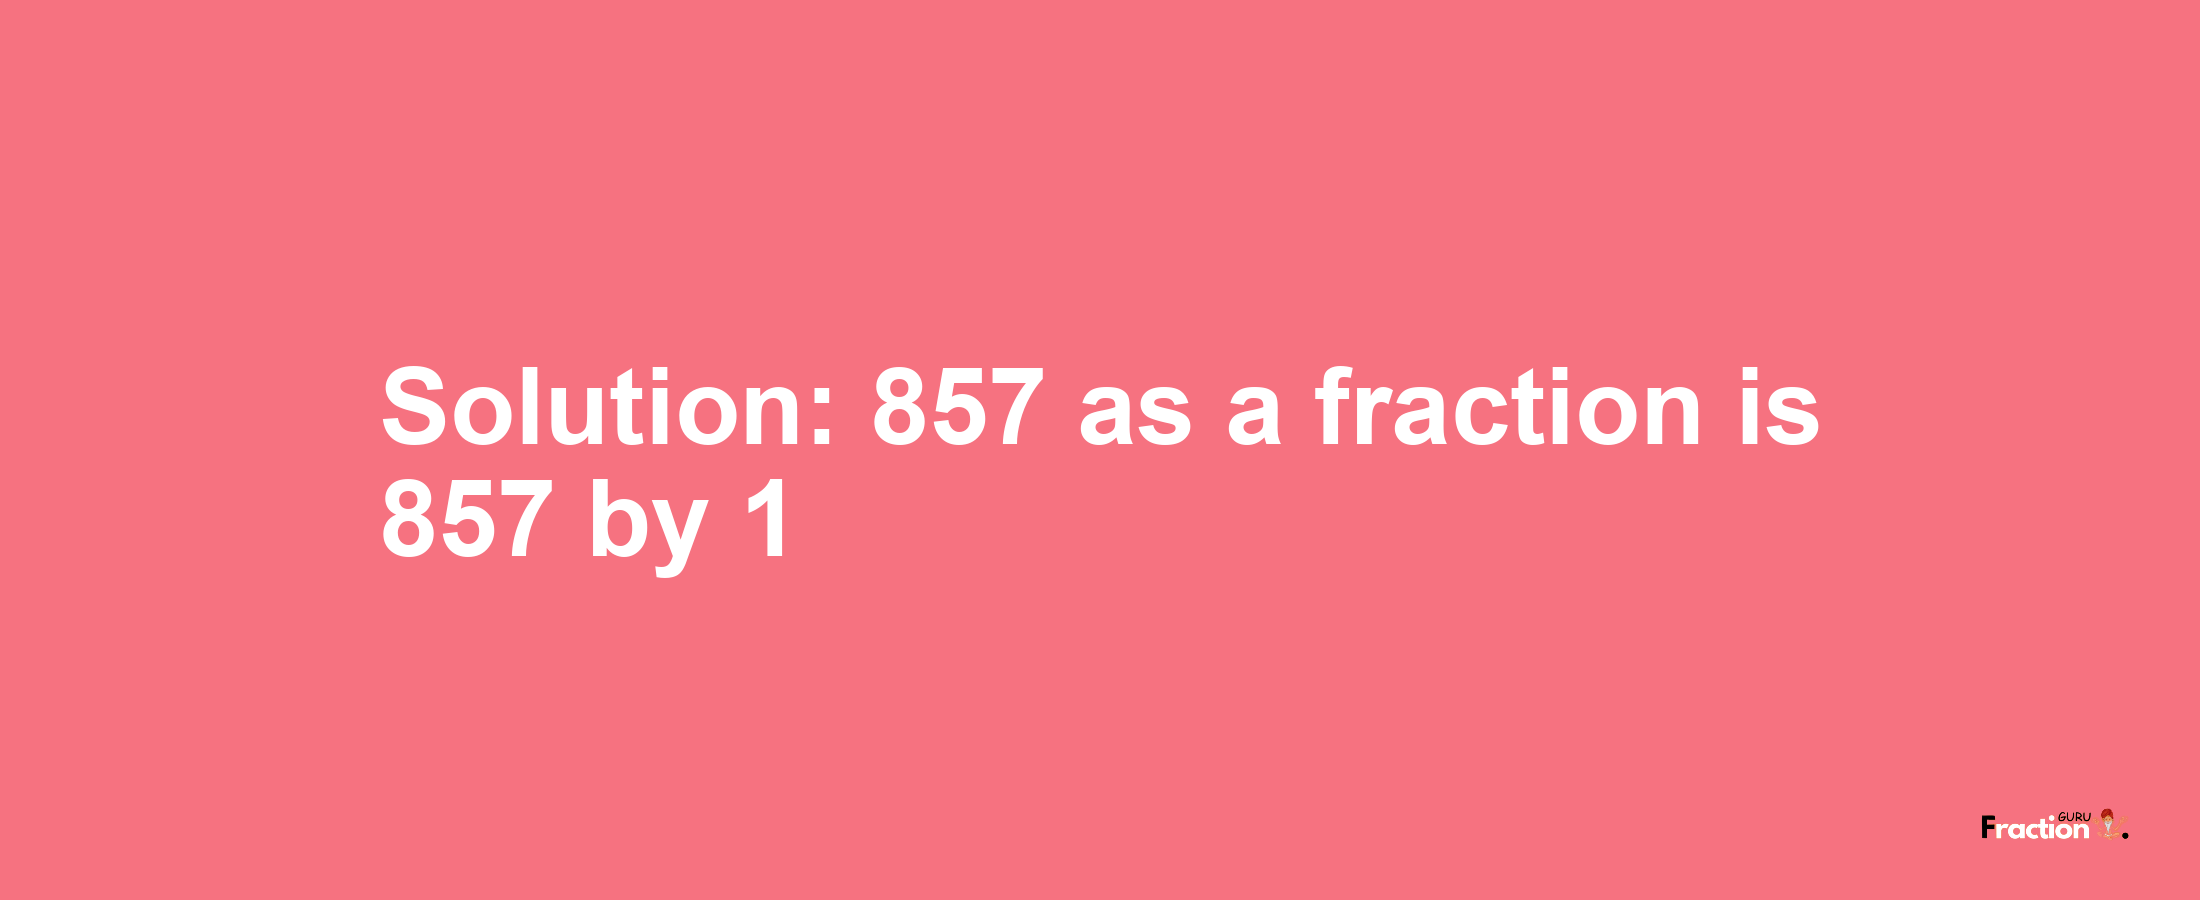 Solution:857 as a fraction is 857/1